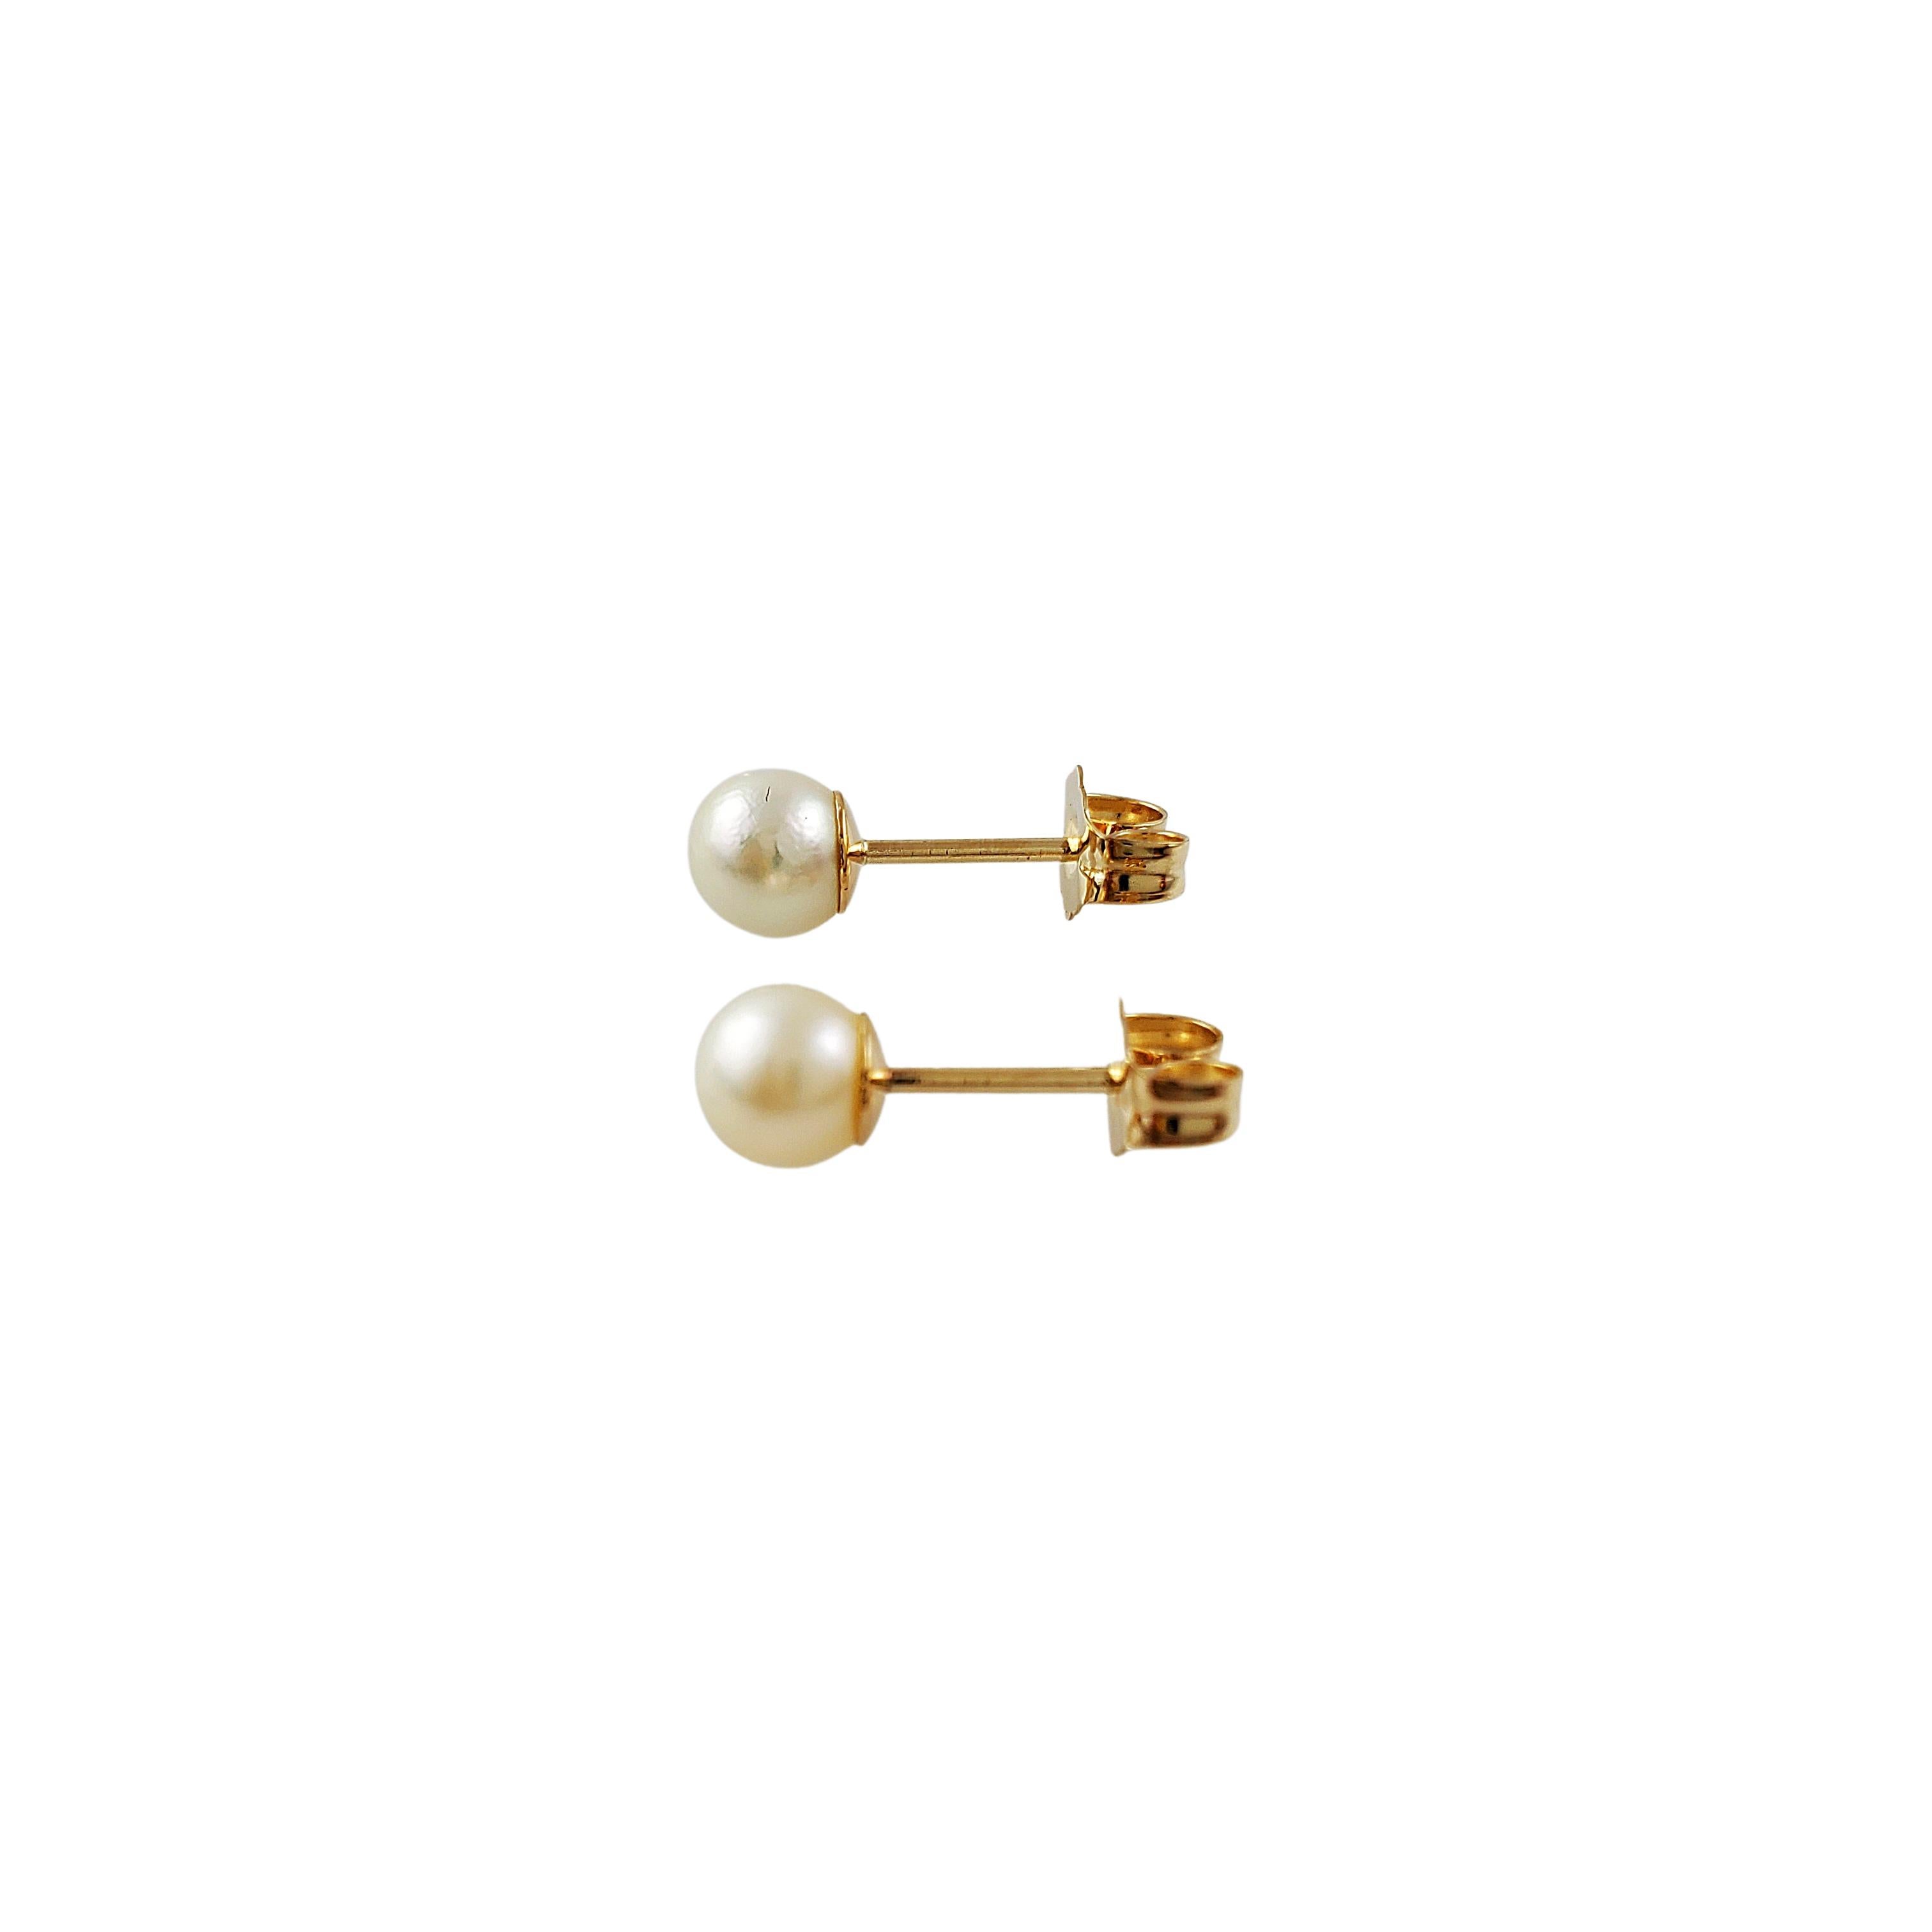 14K Yellow Gold Pearl Earrings

Beautiful classic pearl earrings with 14K yellow gold stem and backs.

Pearl: 5mm each

Weight: 0.4dwt / 0.7 gr

Stem tested 14K

Backs marked 14K

Very good condition, professionally polished.

Will come packaged in